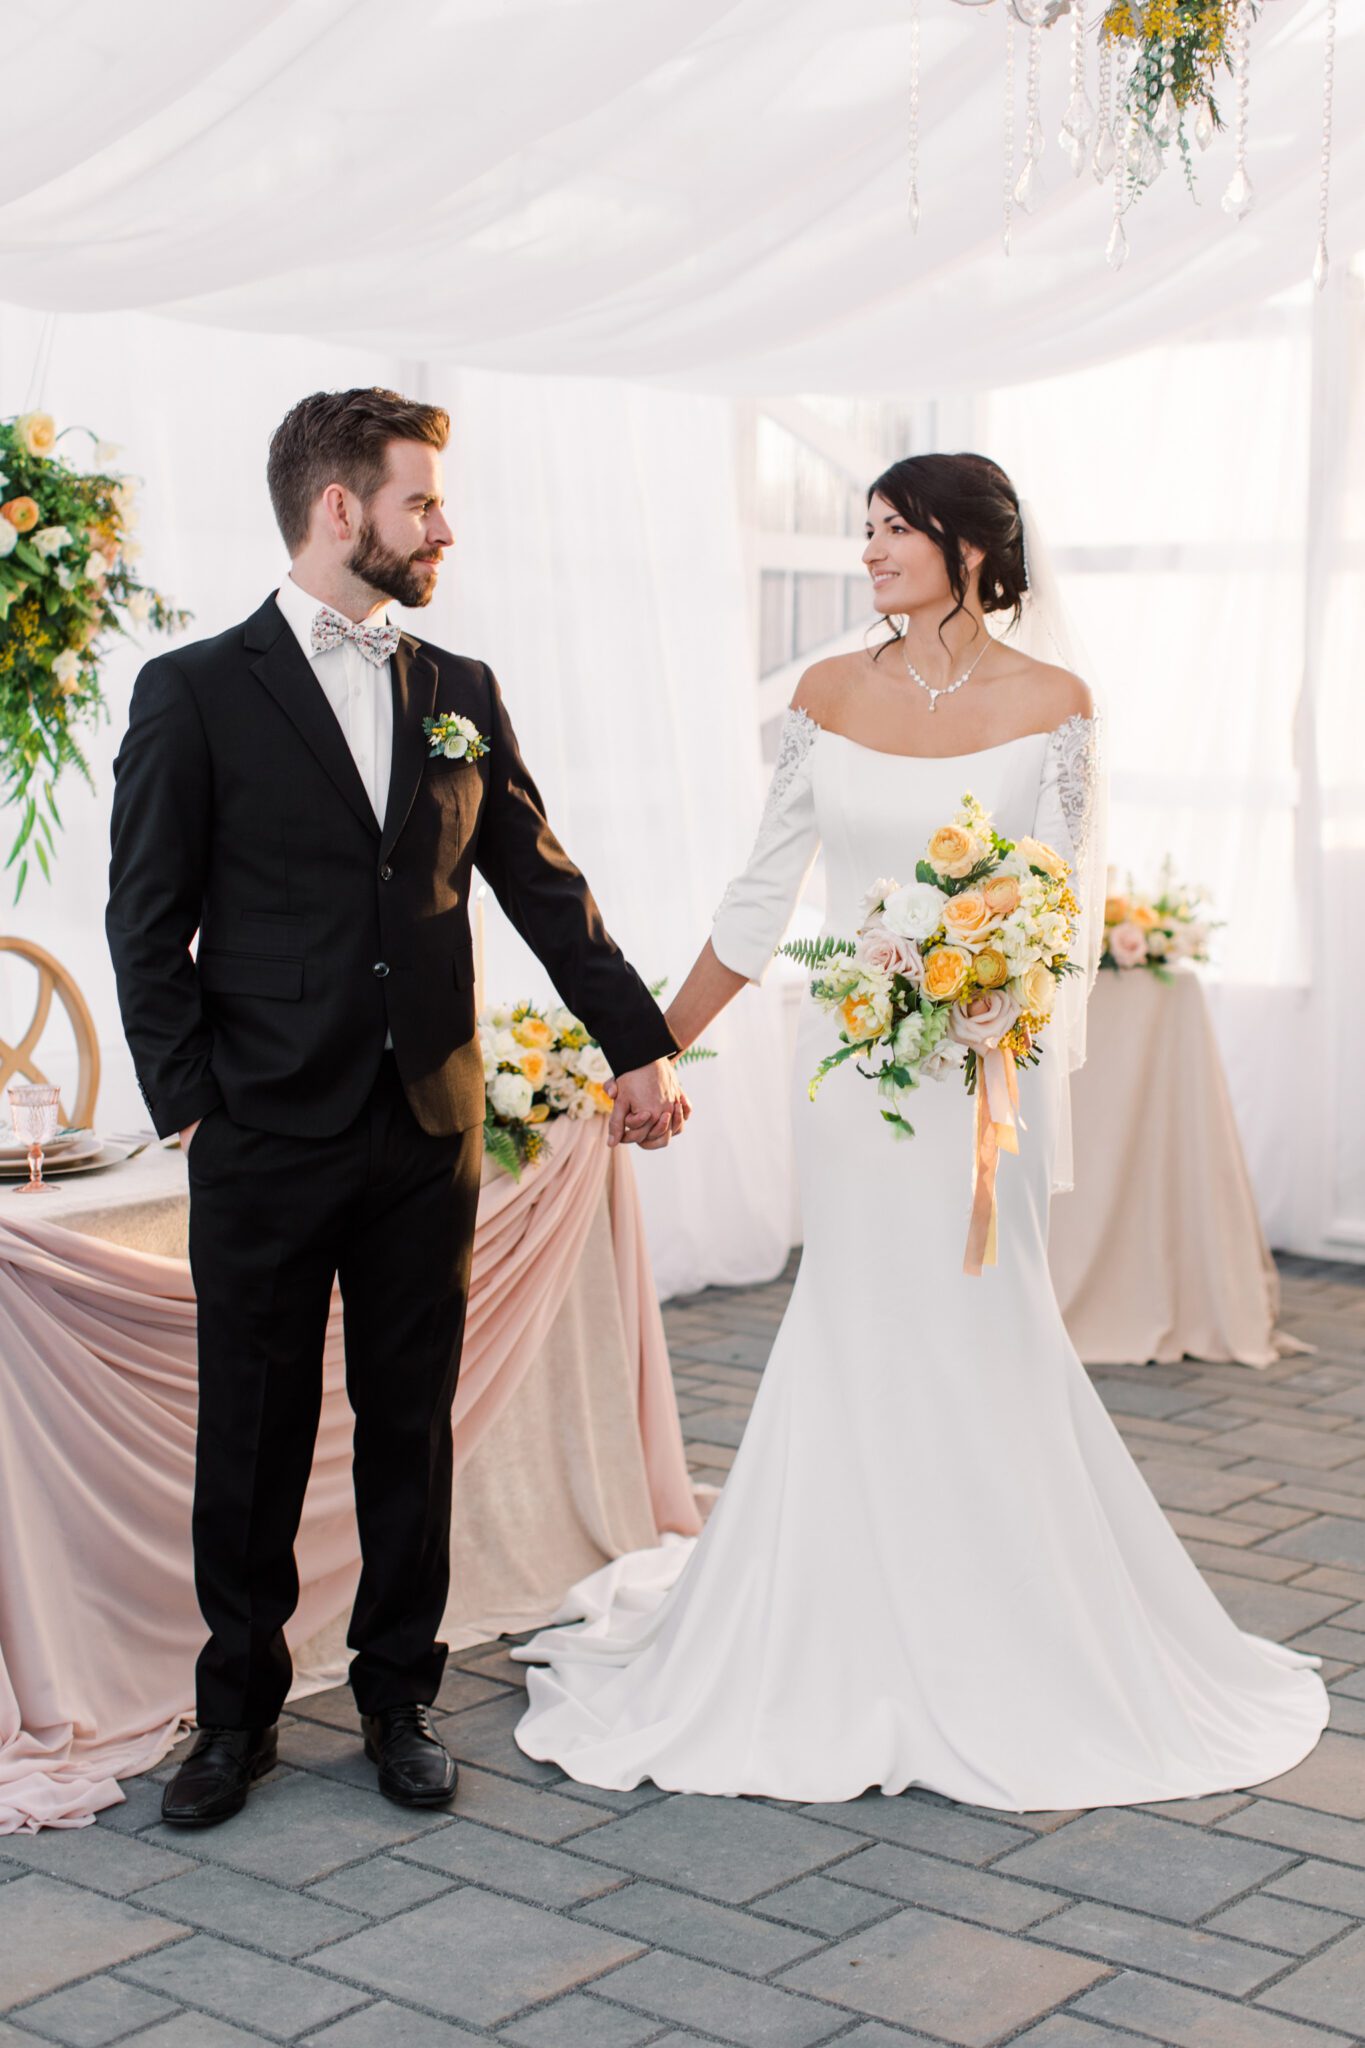 Bride and groom holding hands in tented wedding reception in Sunflower & Swallow's elegant, modern greenhouse located in Bezanson, Alberta